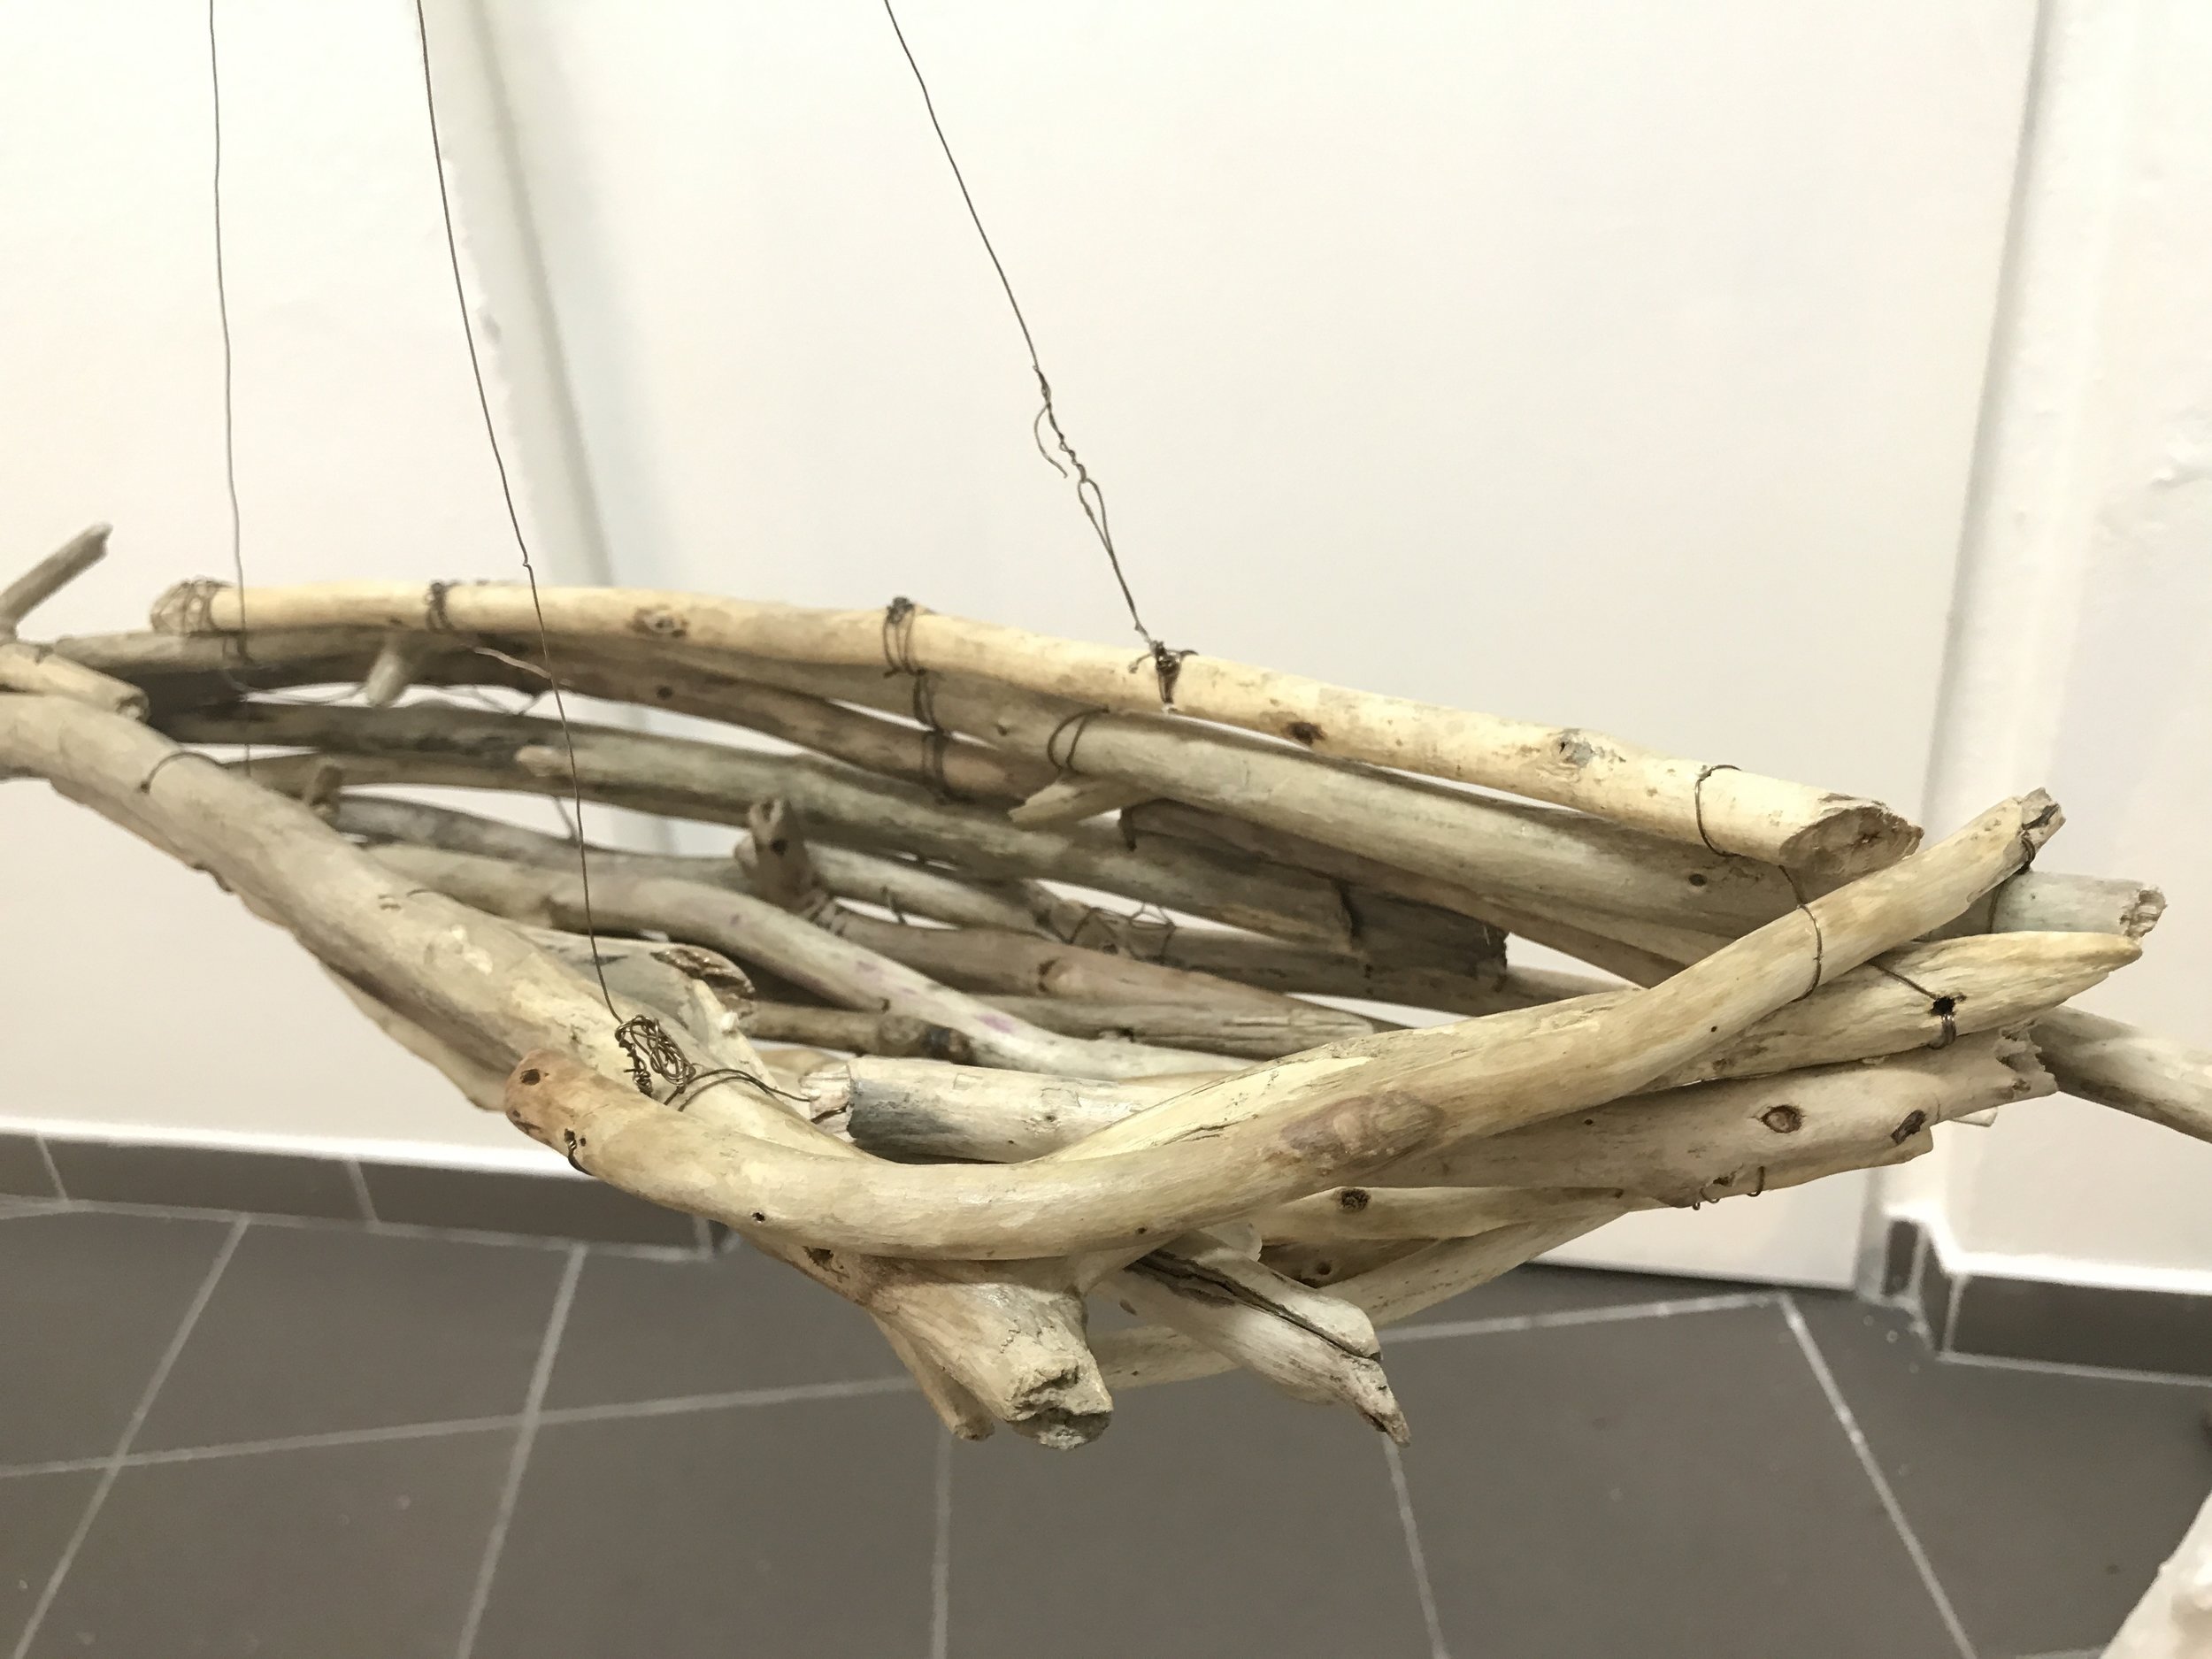  One of four boats made of driftwood and copper wire, each piece of wood burnished by hand. Three boats are suspended above the ‘river’ by thin wires strung from large natural wood tripods. Installation is easily reconfigured to fit any space.  